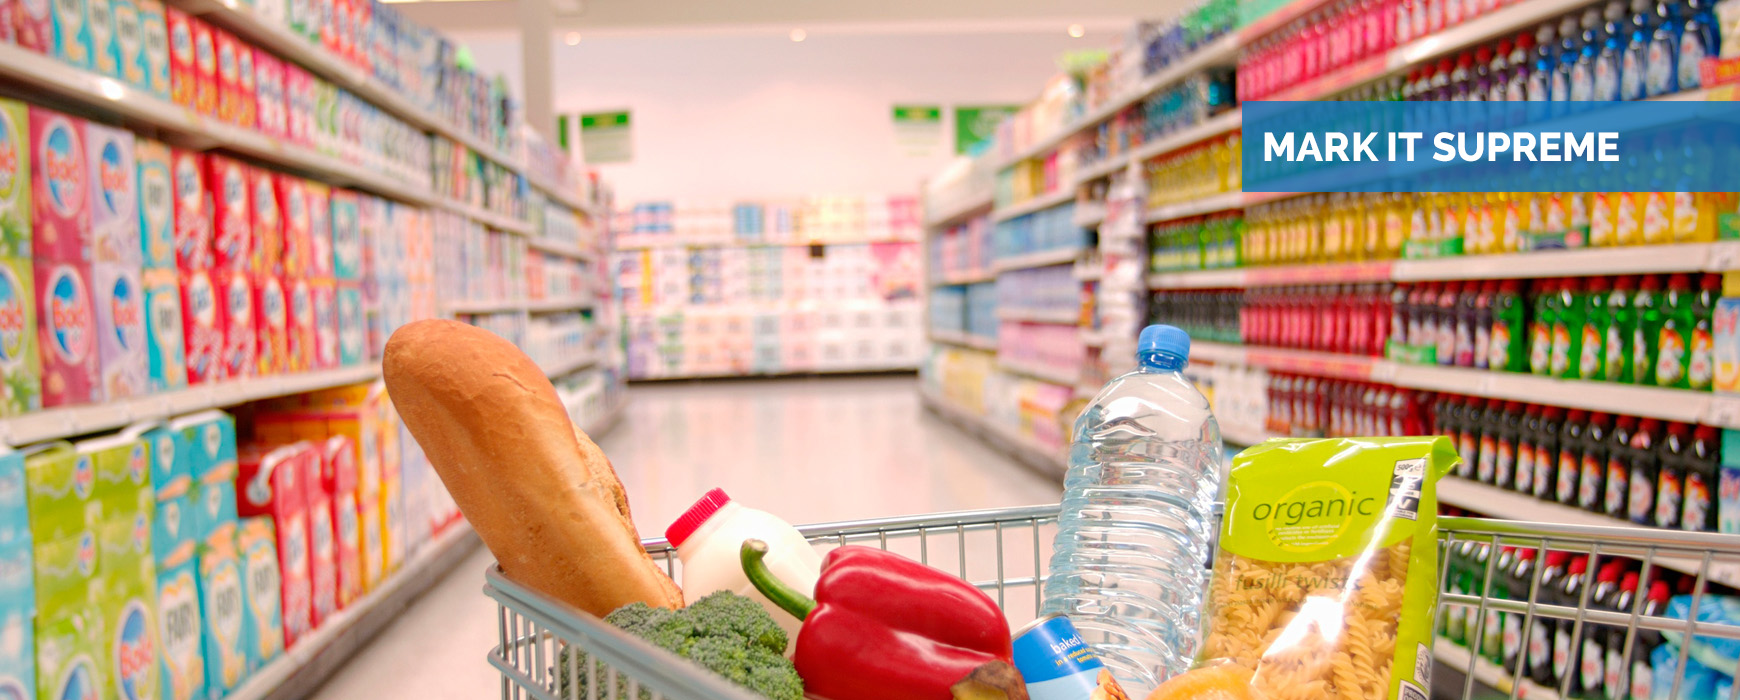 Our supermarket offers around 10,000 varieties of product<br><hr>